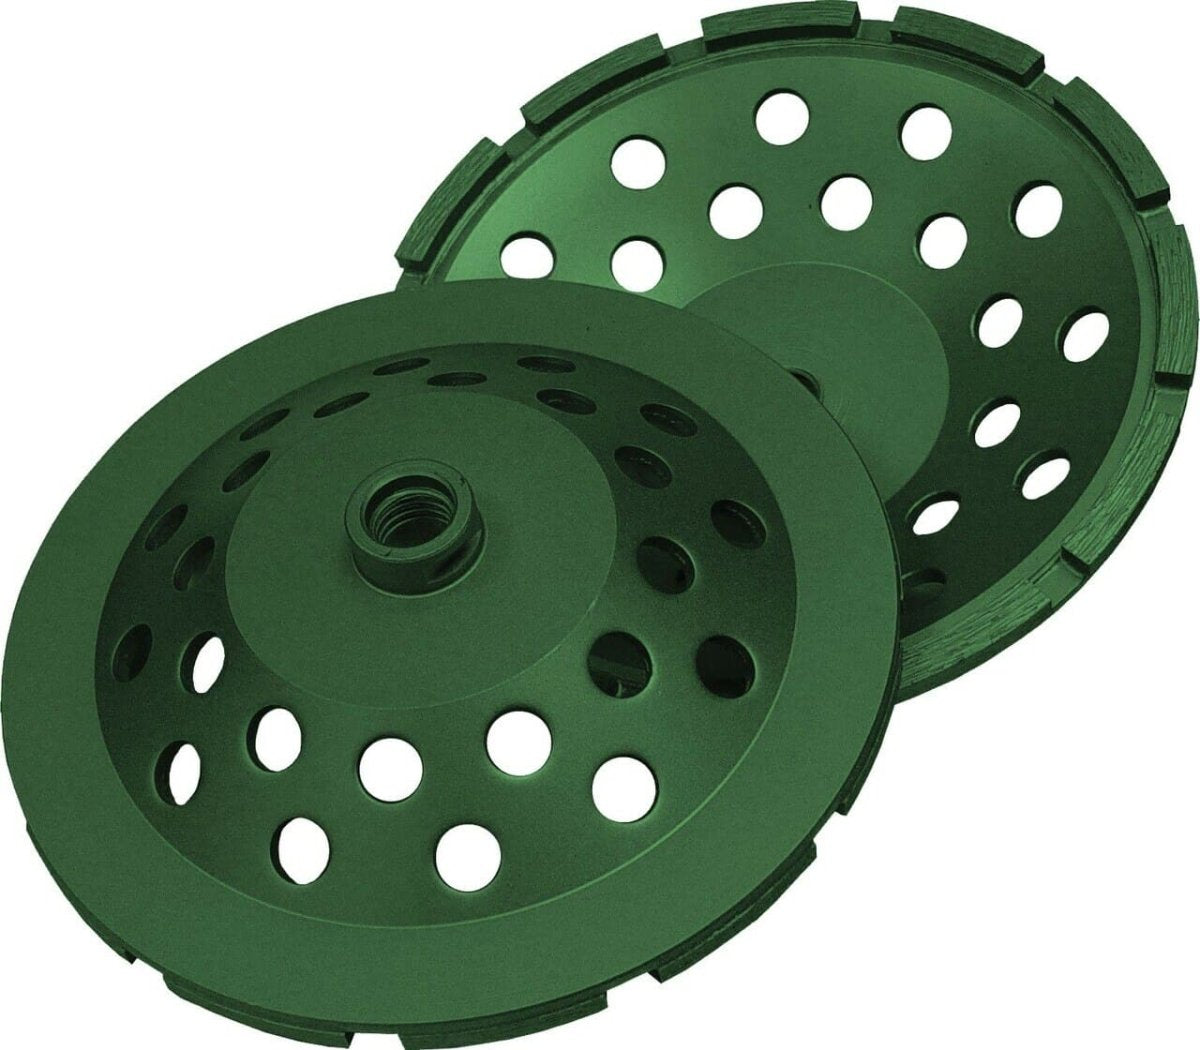 Utility Green Segmented Cup Grinder Single Row - Diamond Products